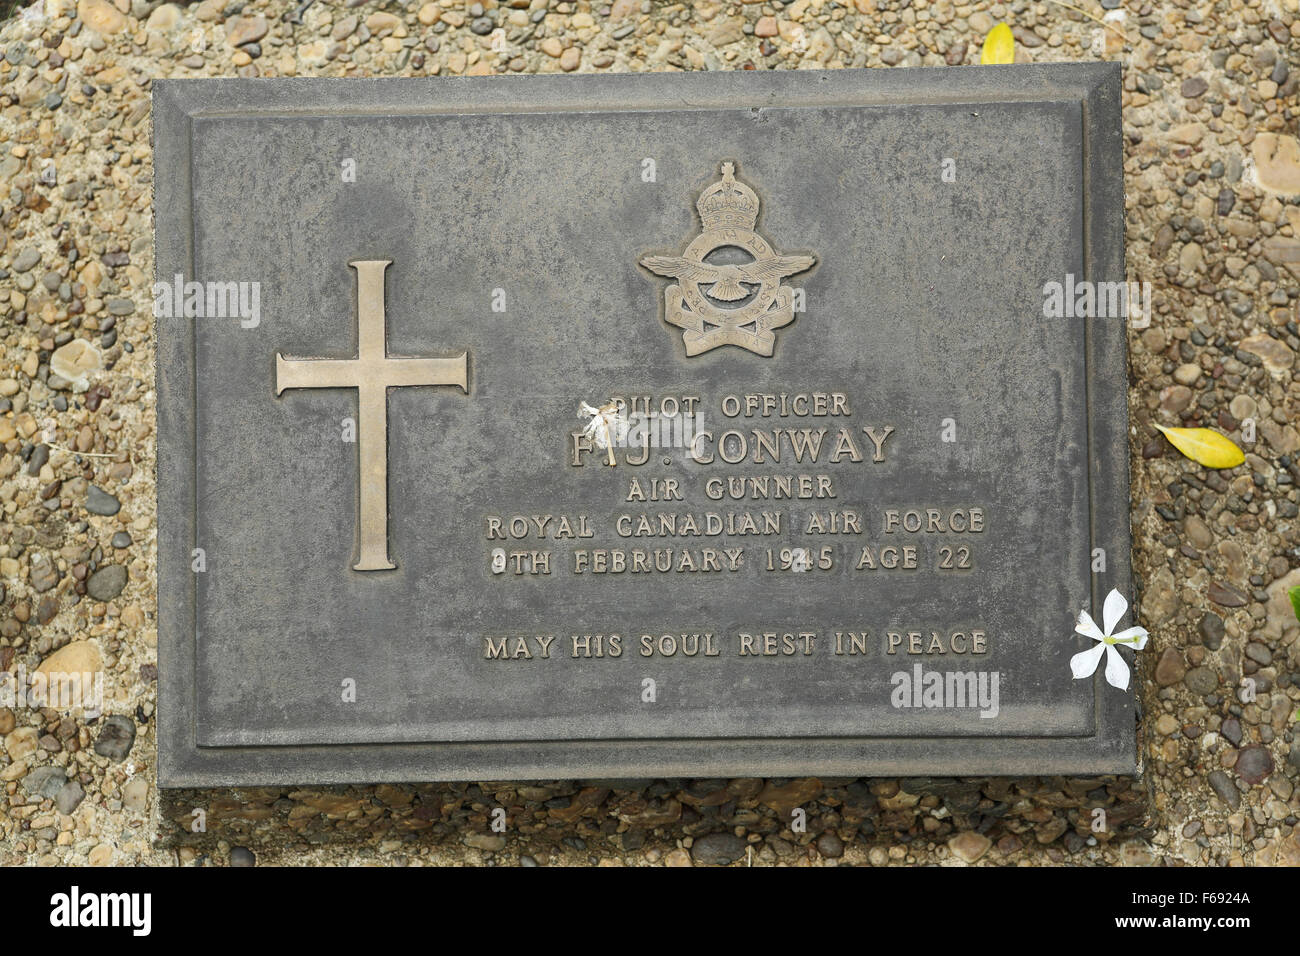 The grave of a Canadian pilot officer at Taukkyan War Cemetery near Yangon, Myanmar. Stock Photo